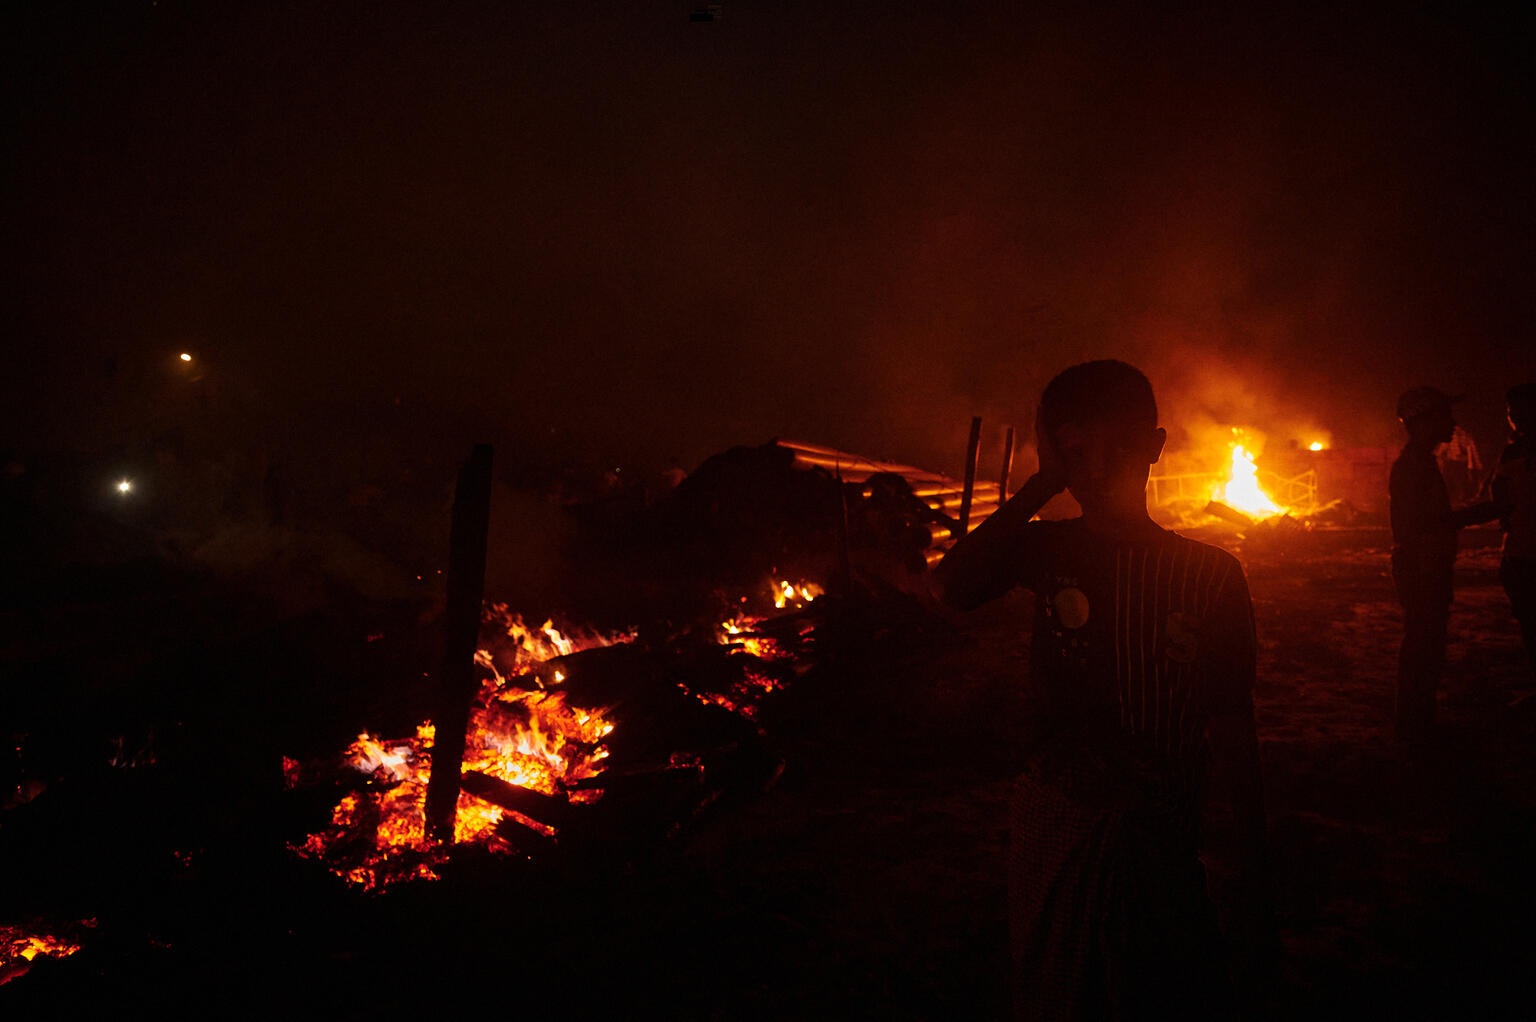 On 5 March 2023, at the centre of a dark and smoke-filled picture, a child can be seen amidst the burning fire and debris as refugees sift through the ruins of Balukhali refugee camp in Ukhia, Bangladesh.